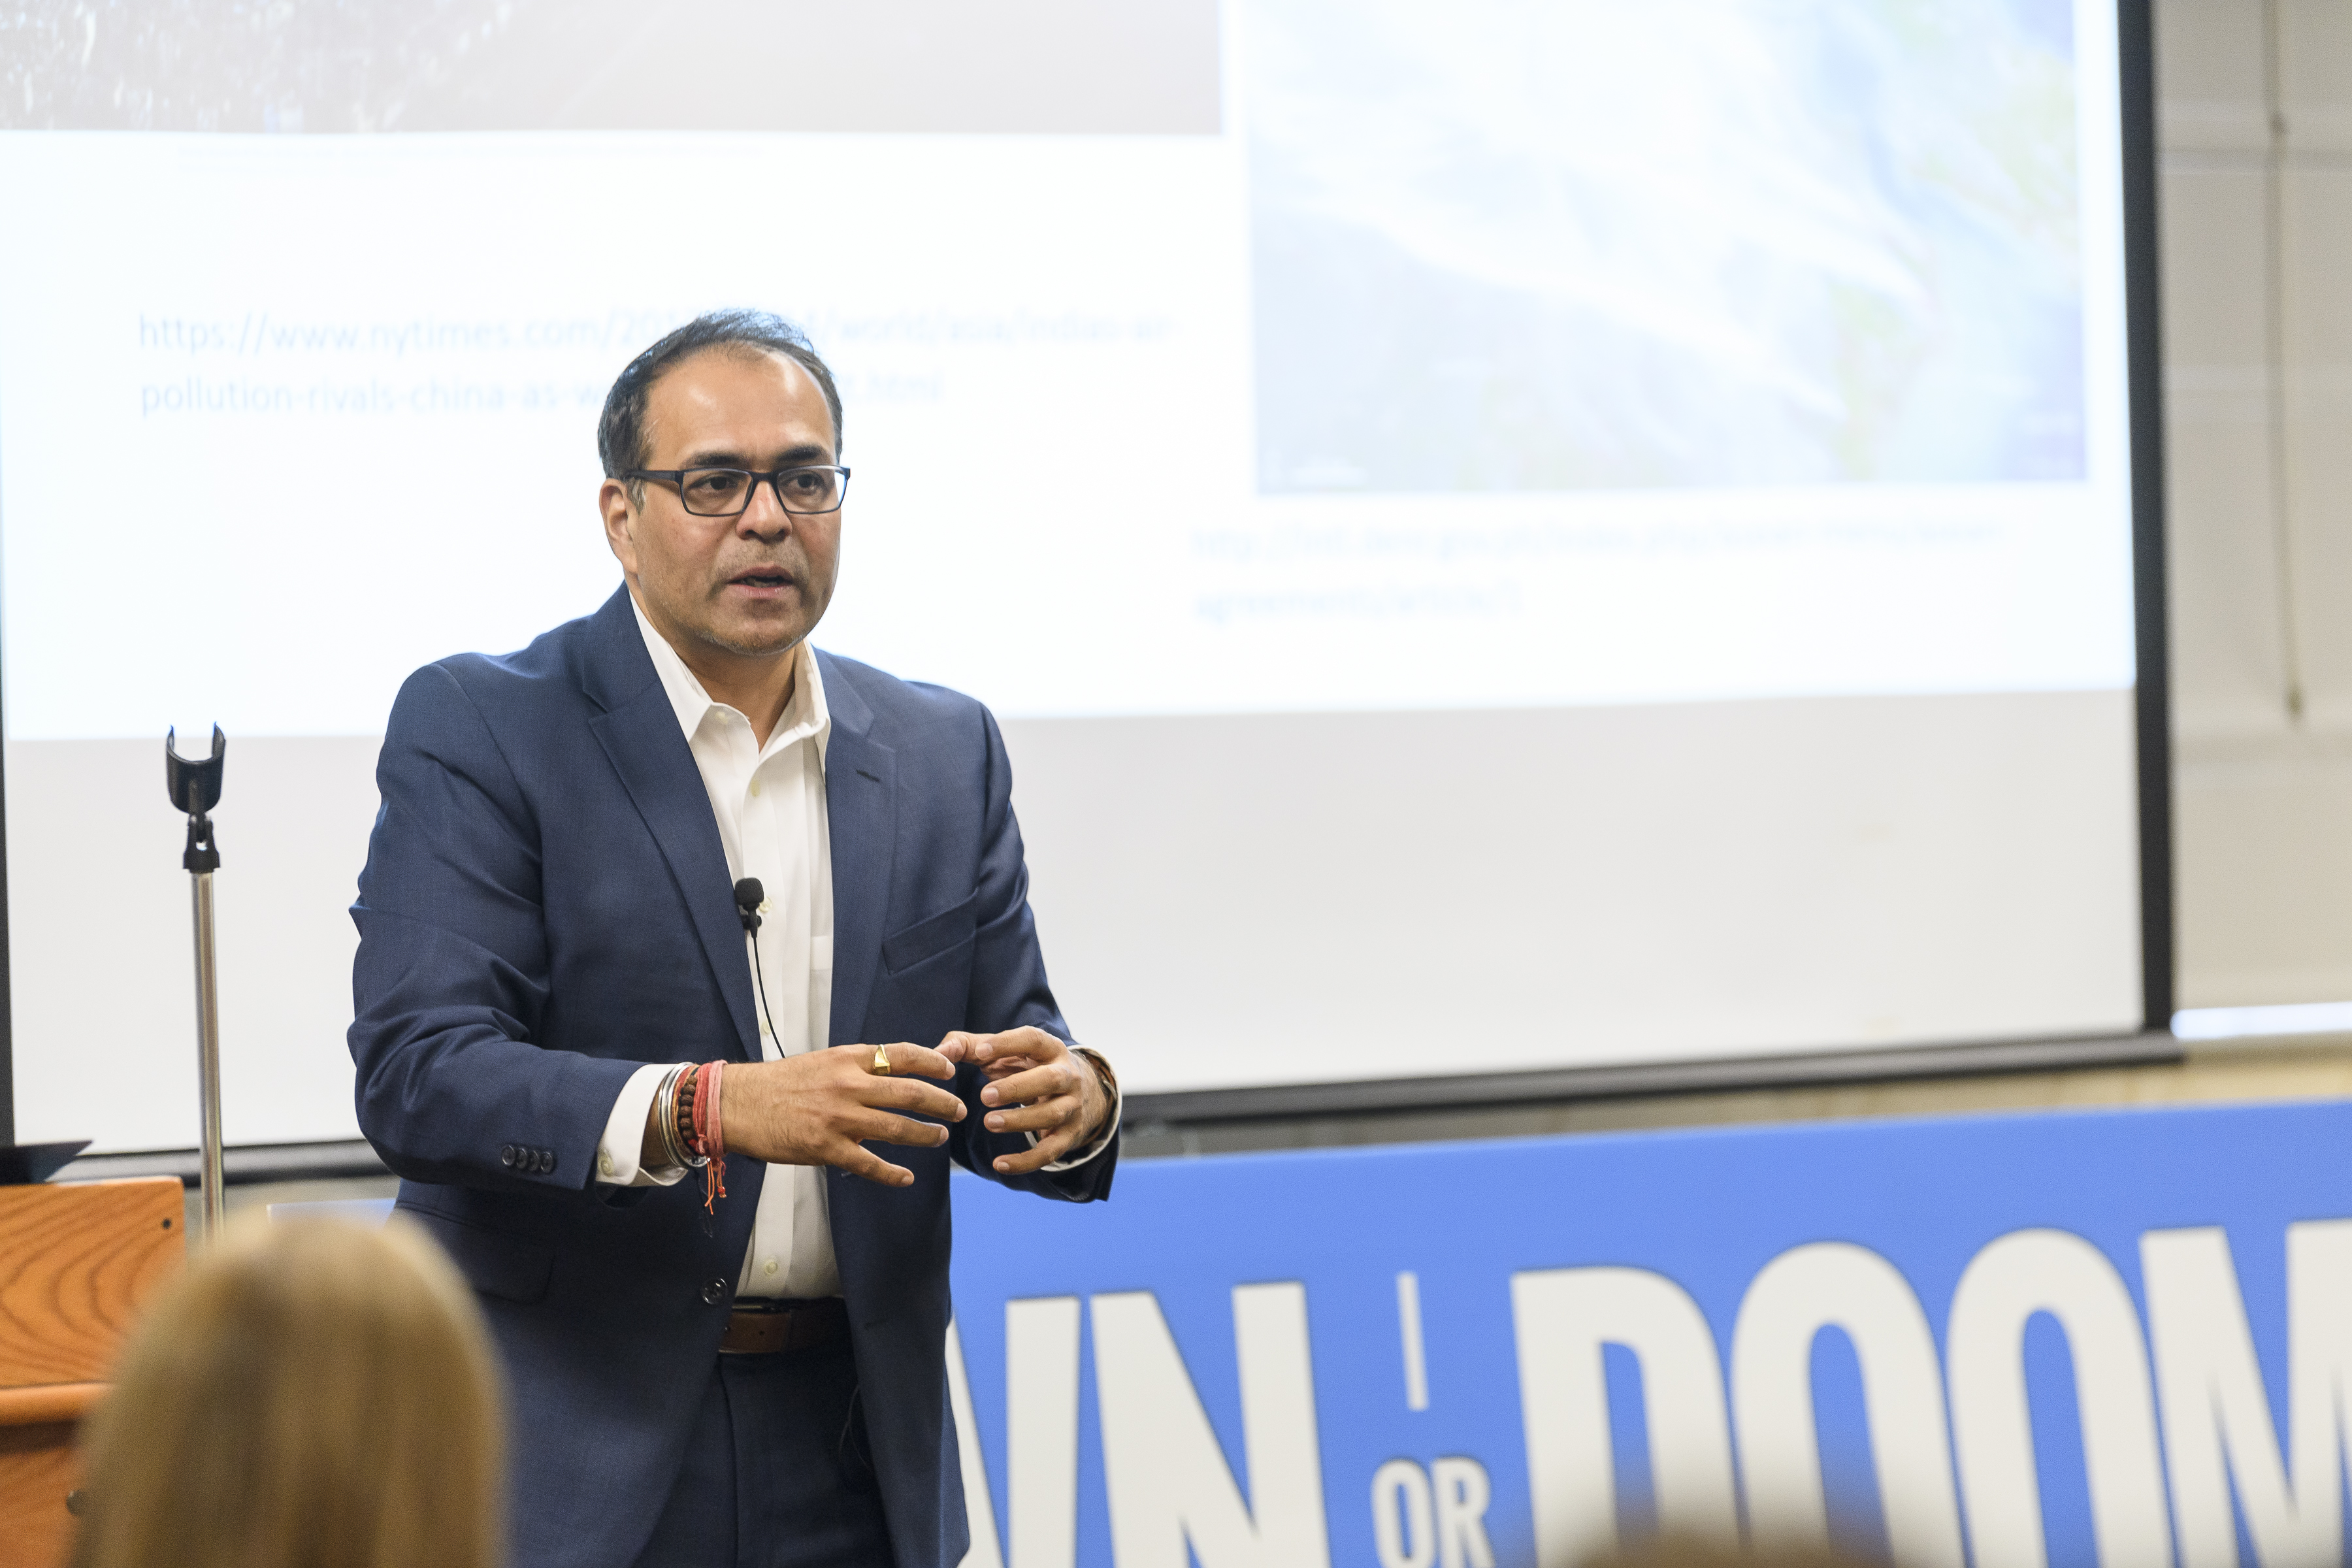 Dev Niyogi, Professor of Agronomy and EAPS, former Indiana State Climatologist, "How cities shape climate and why smart urban design may help prevent natural disasters" 